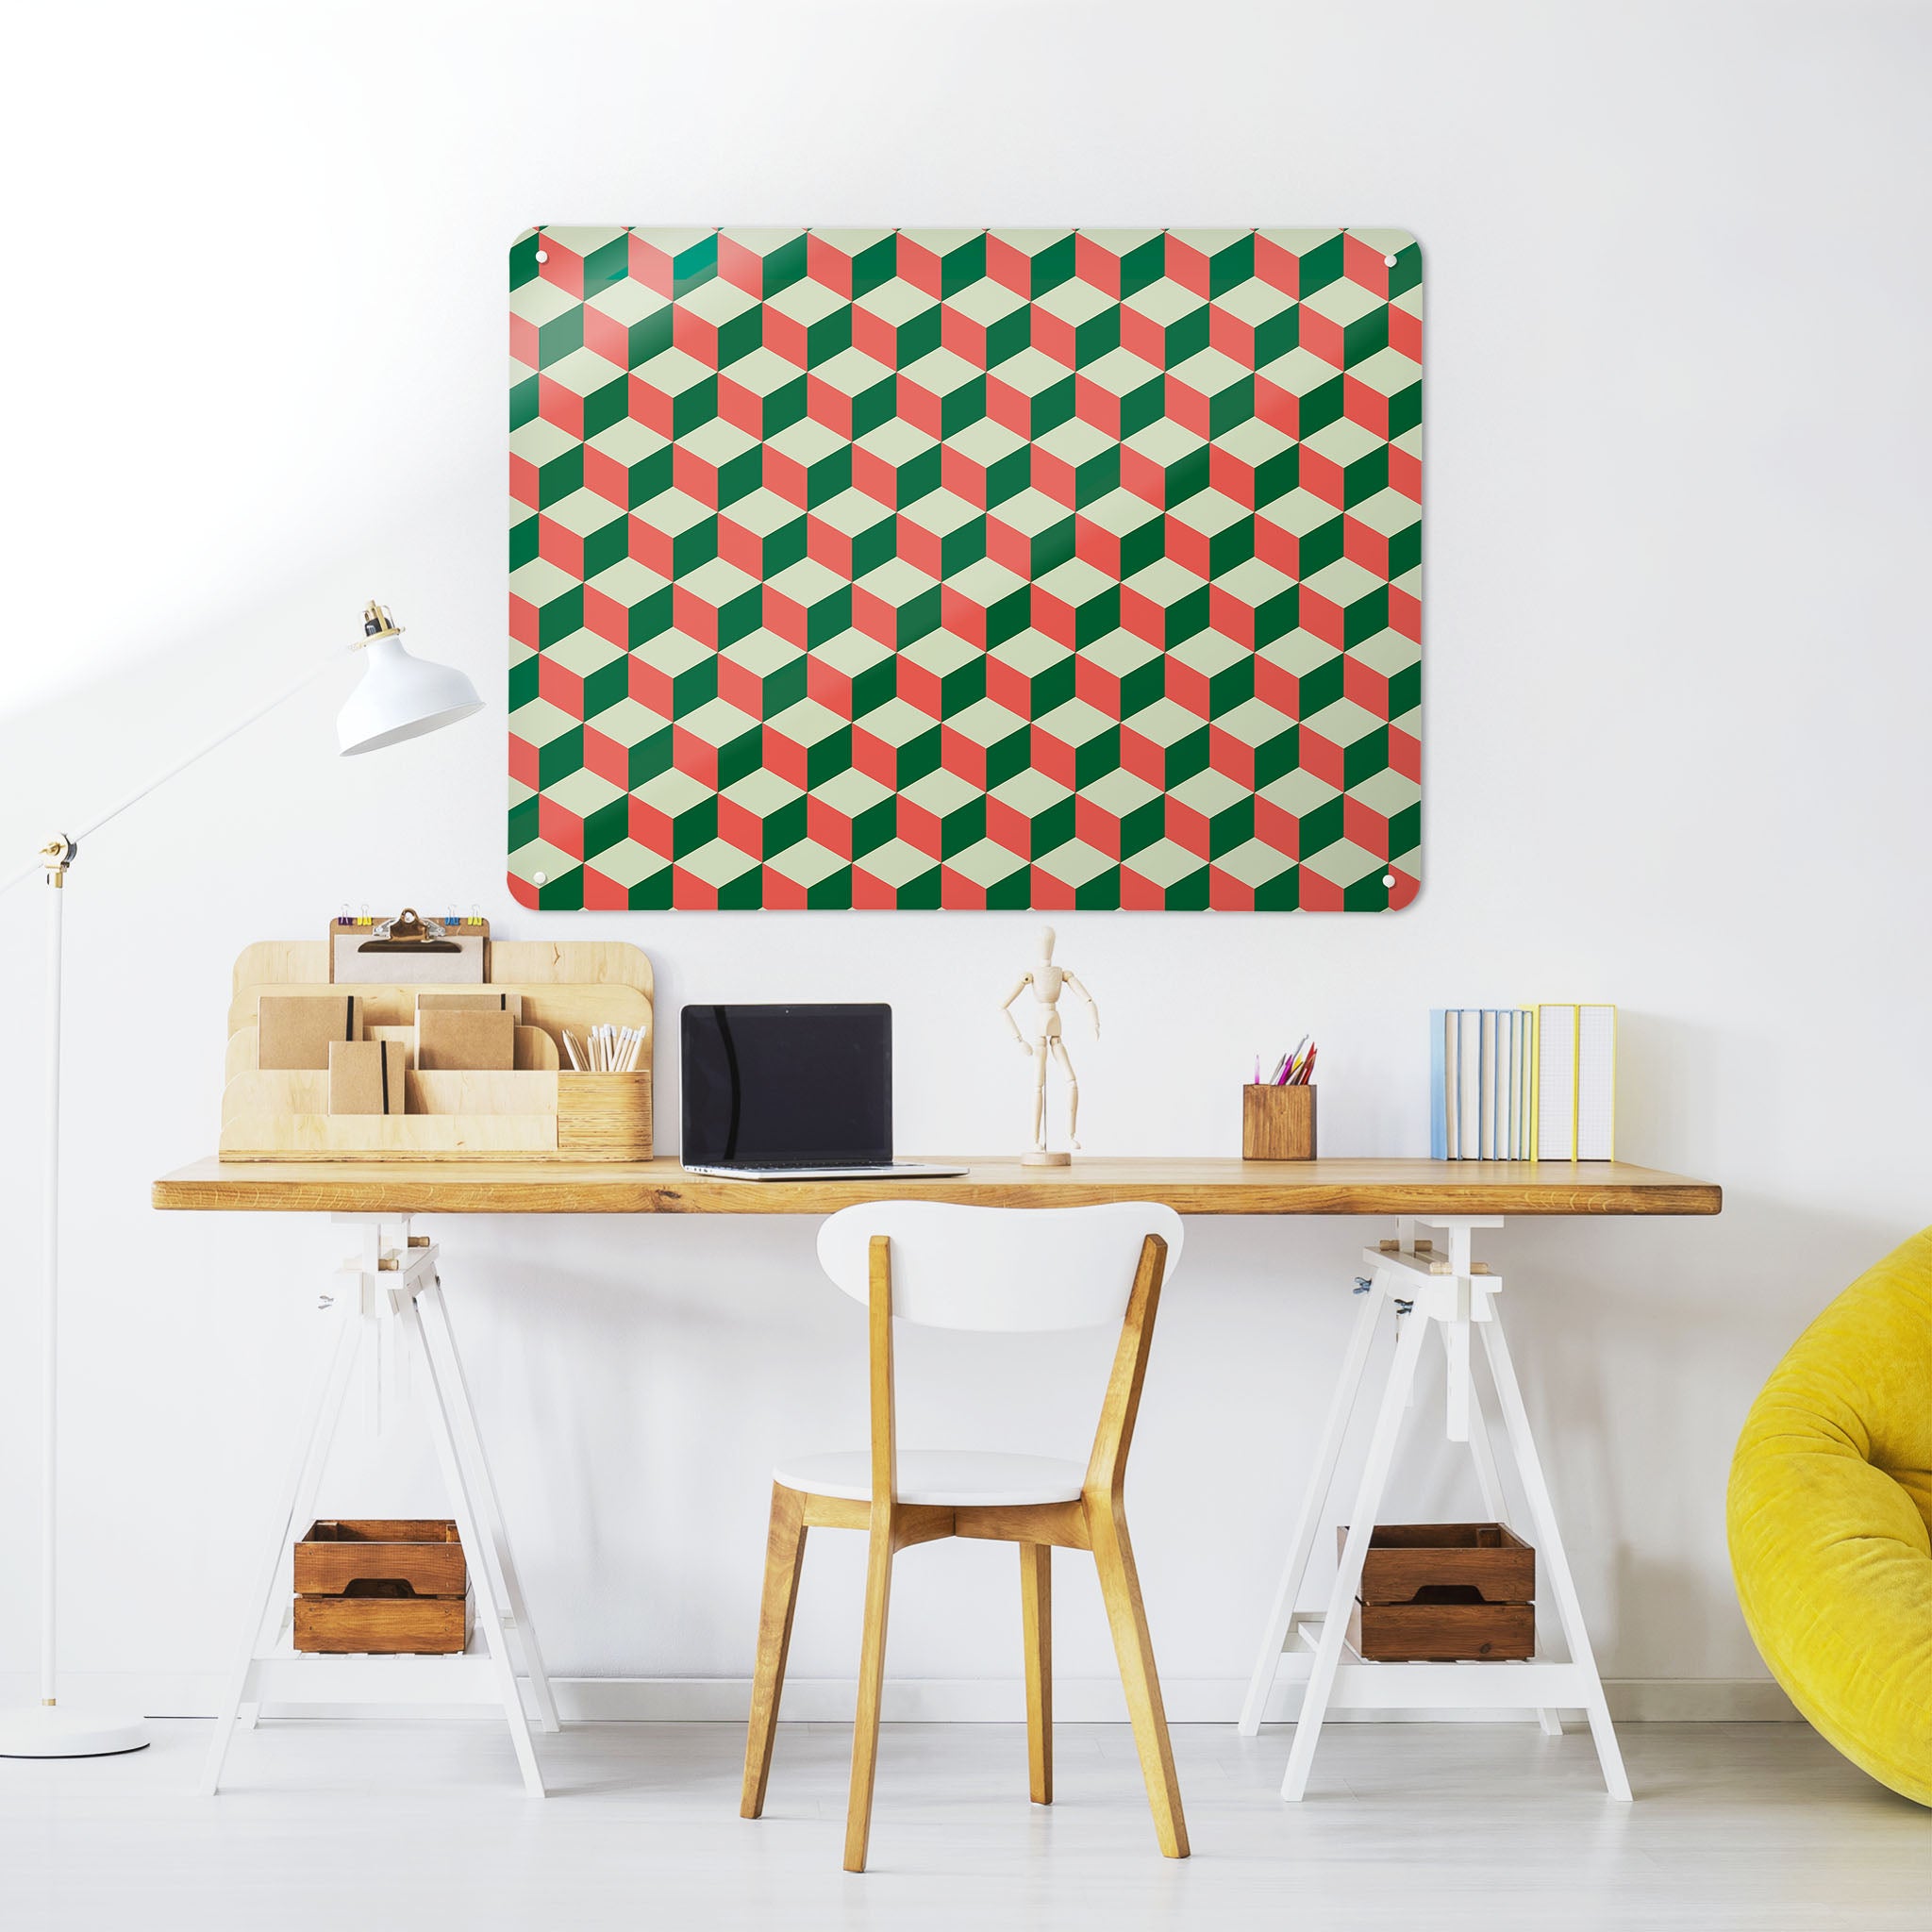 A desk in a workspace setting in a white interior with a magnetic metal wall art panel showing a red, green and cream blocks design 